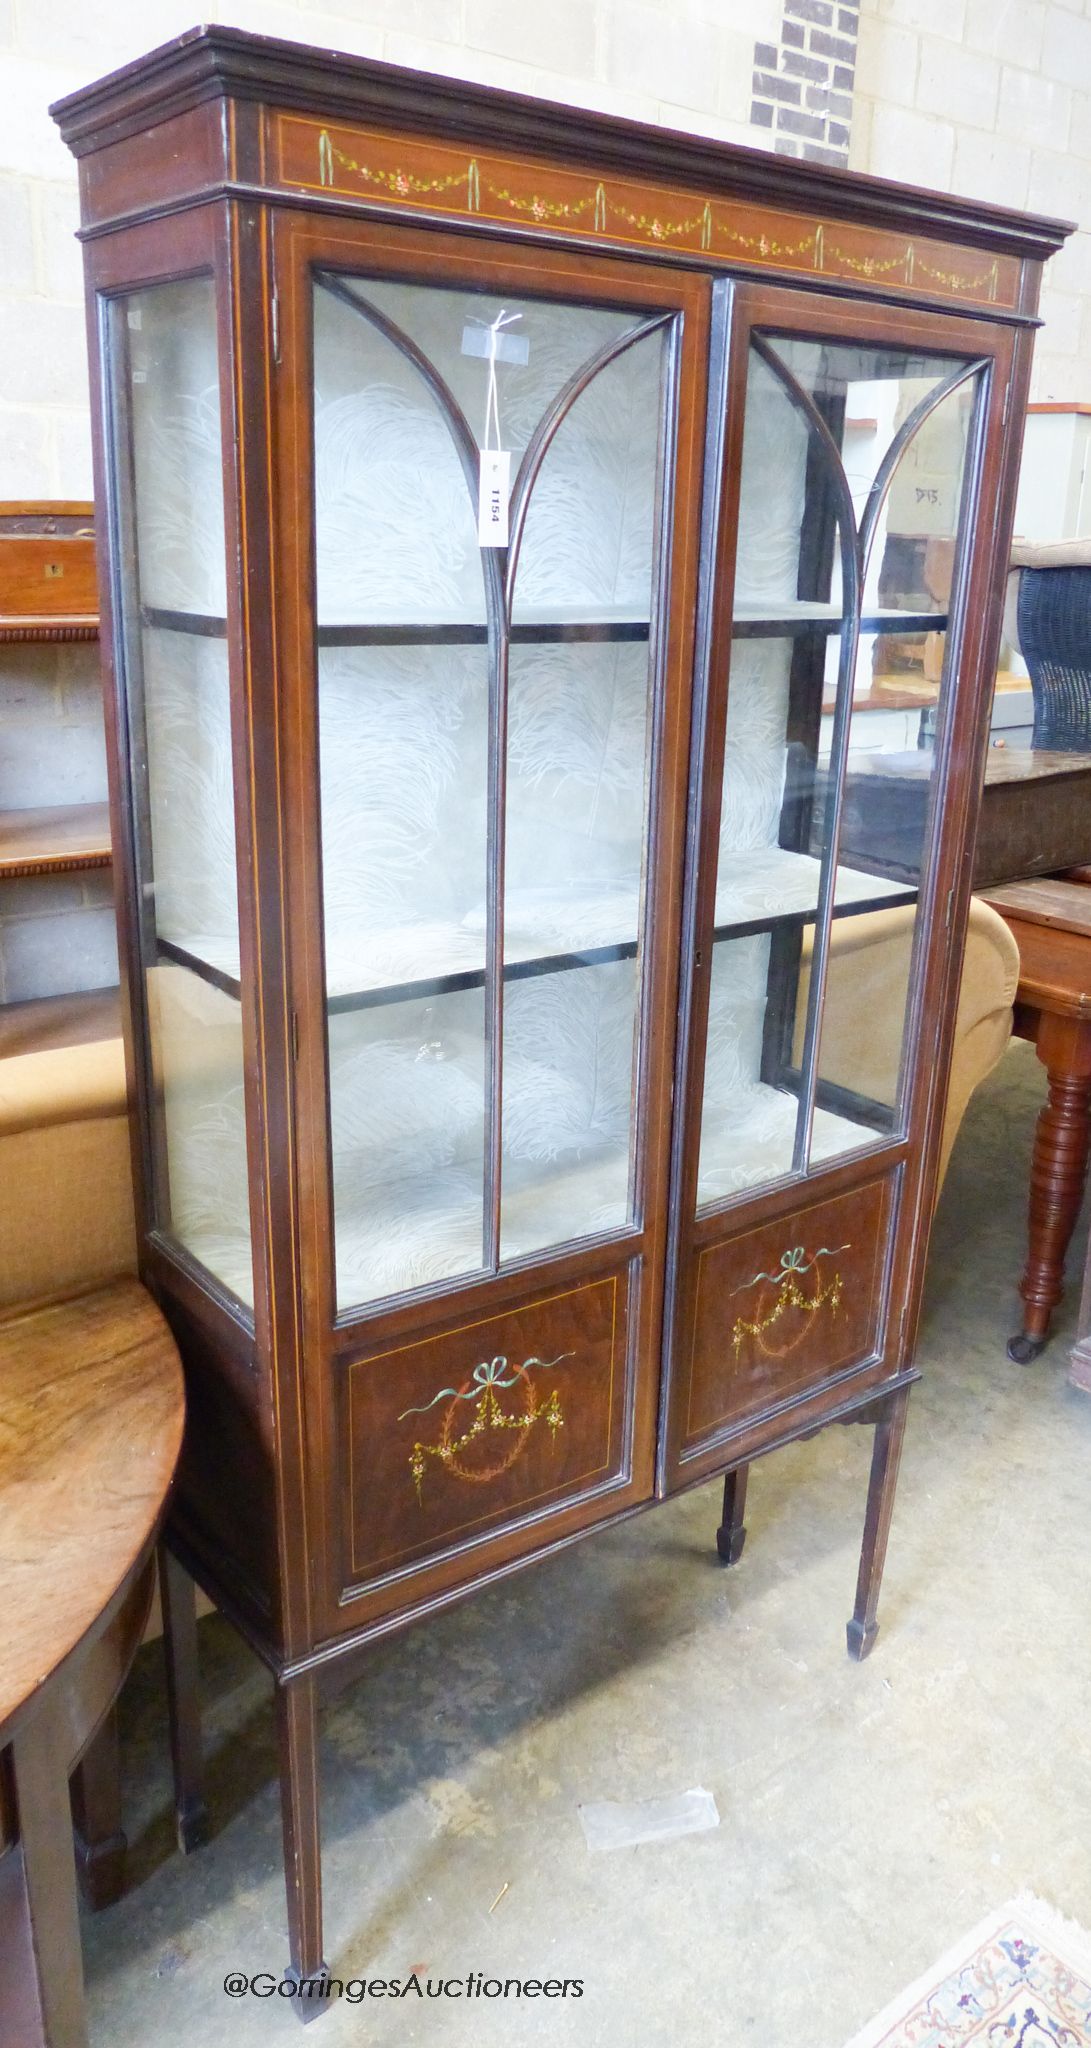 An Edwardian painted mahogany display cabinet. W-89, D-30, H-171cm.